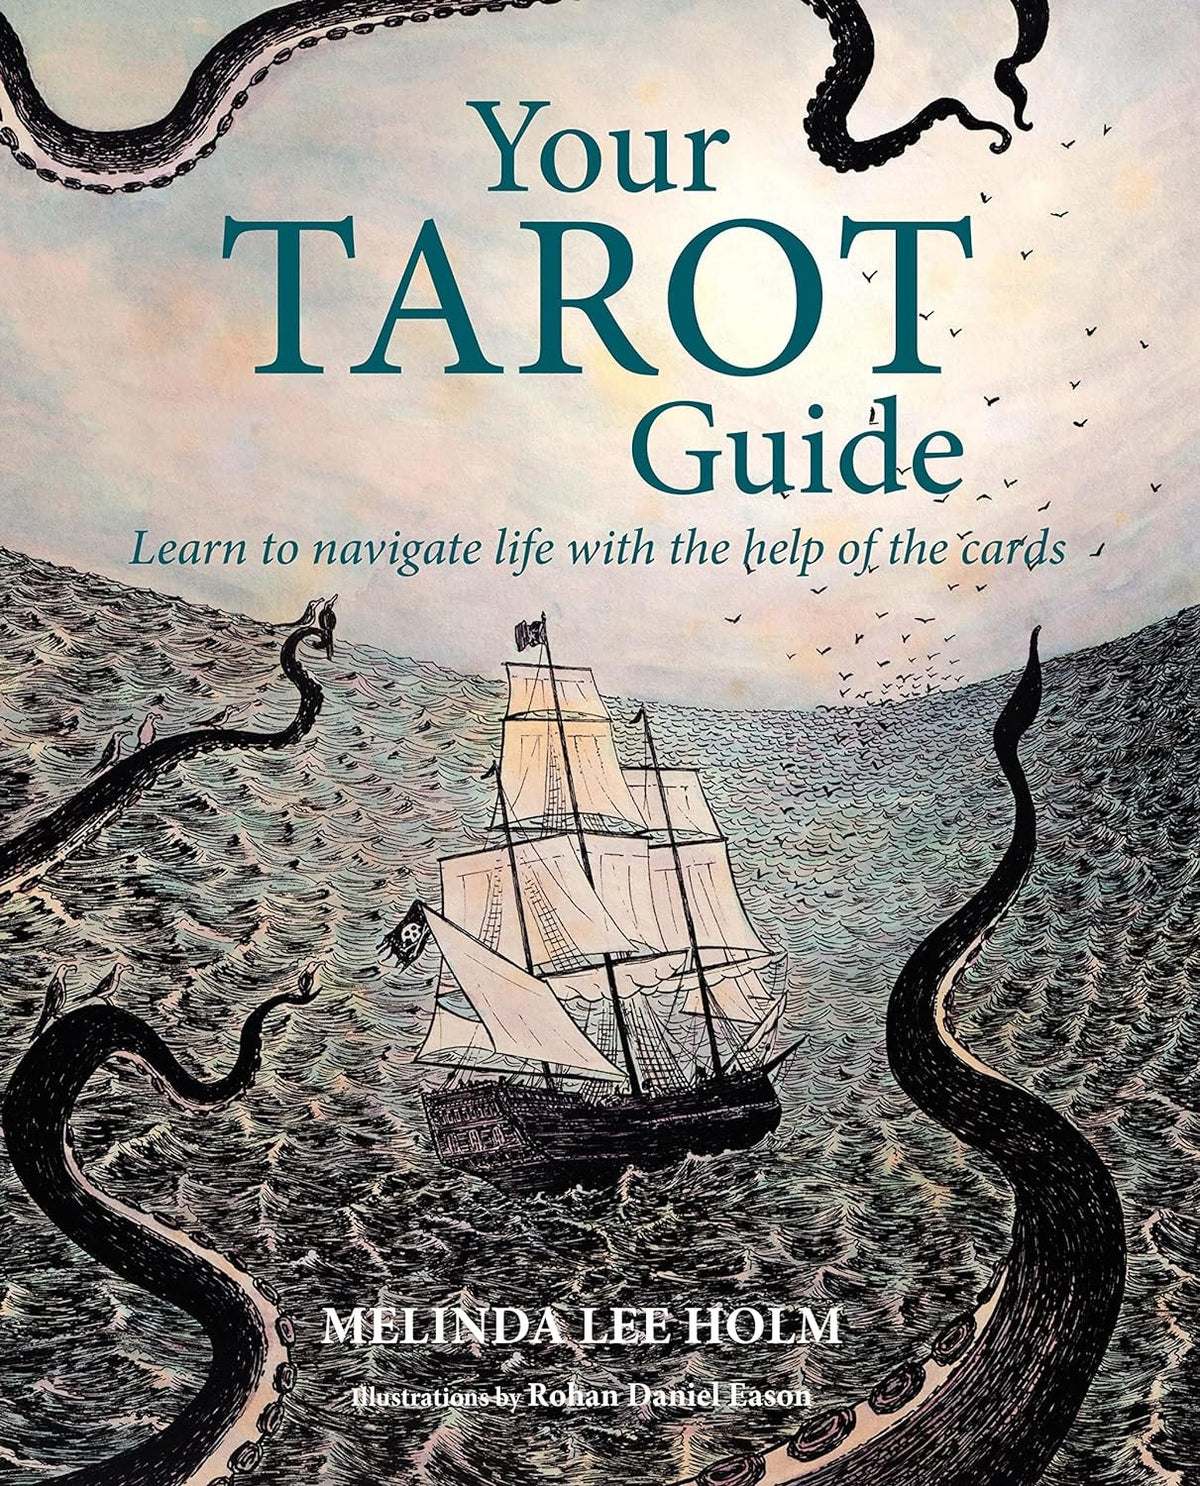 Your Tarot Guide